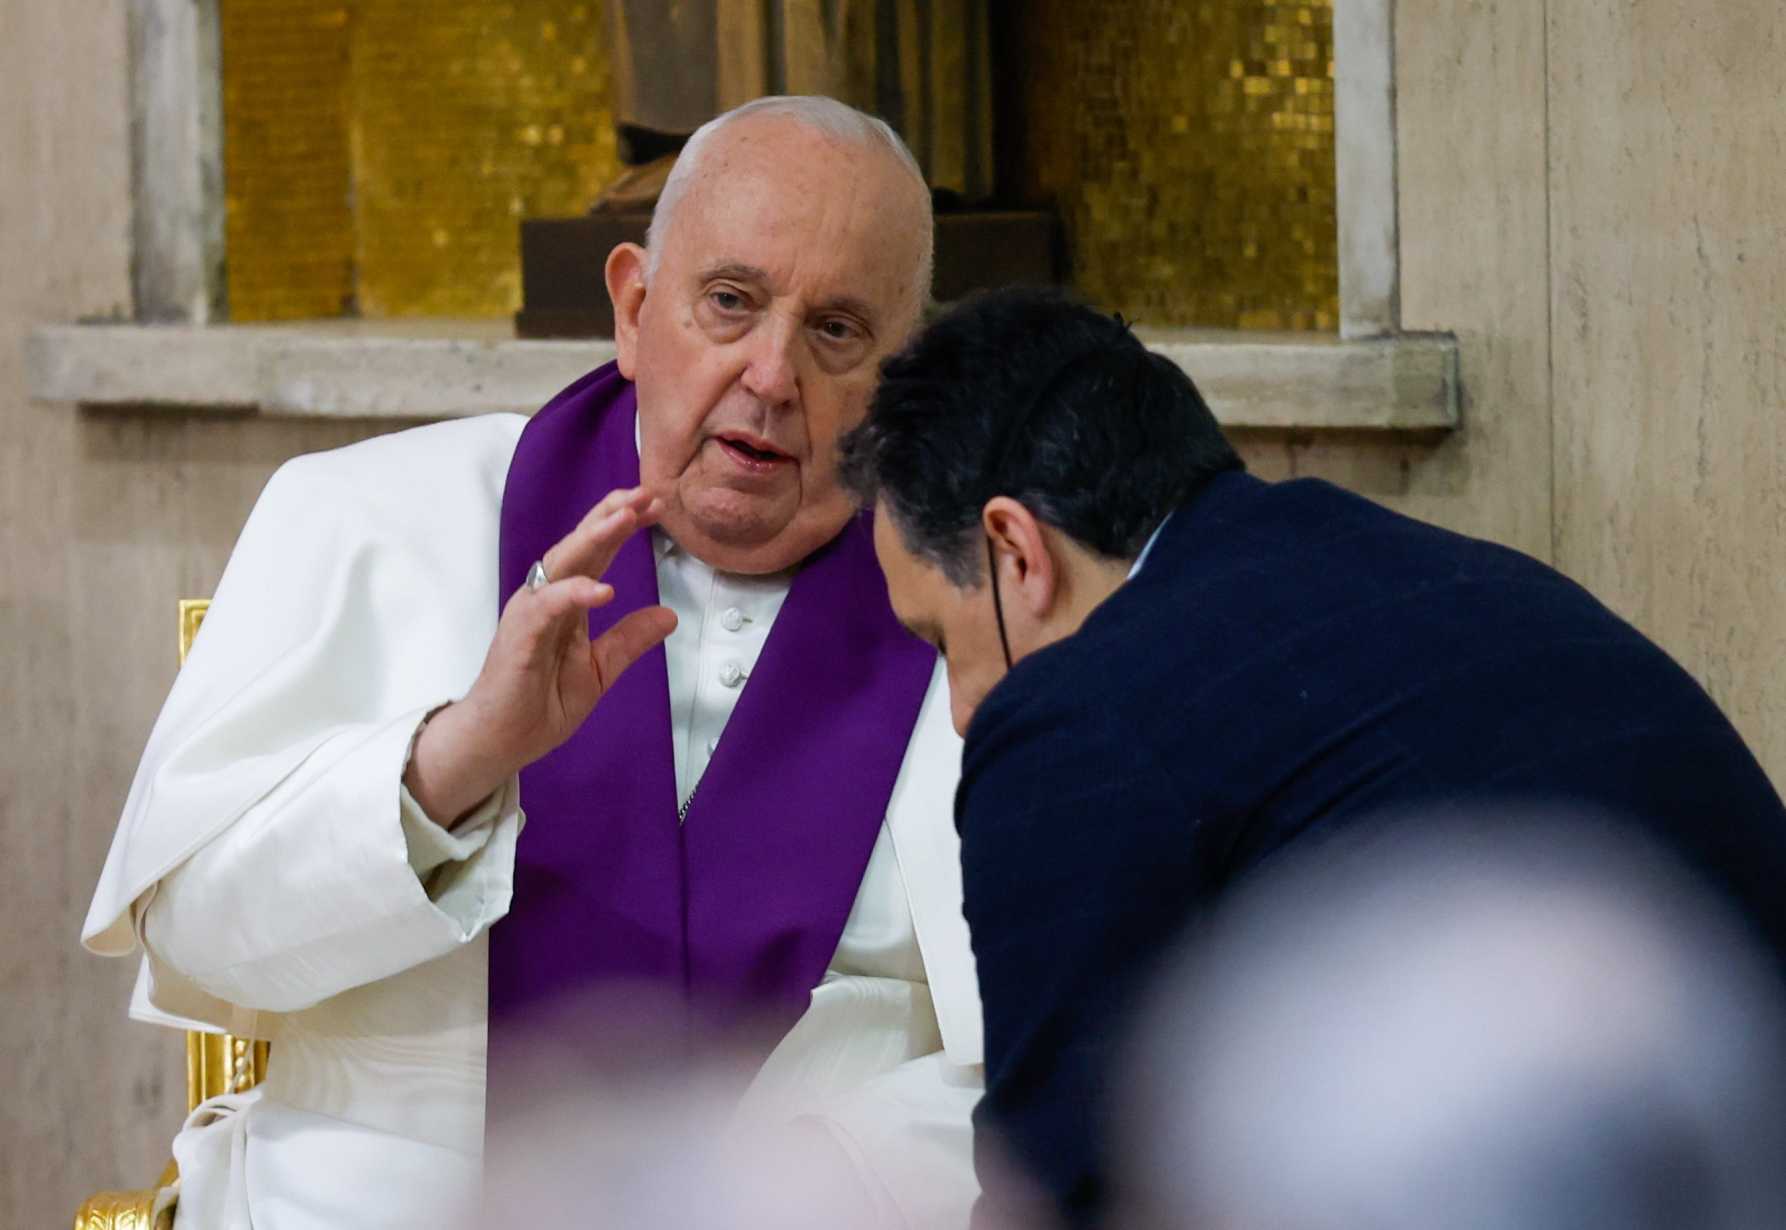 Pope tells priests: 'Don't ask too much' during confession, forgive always